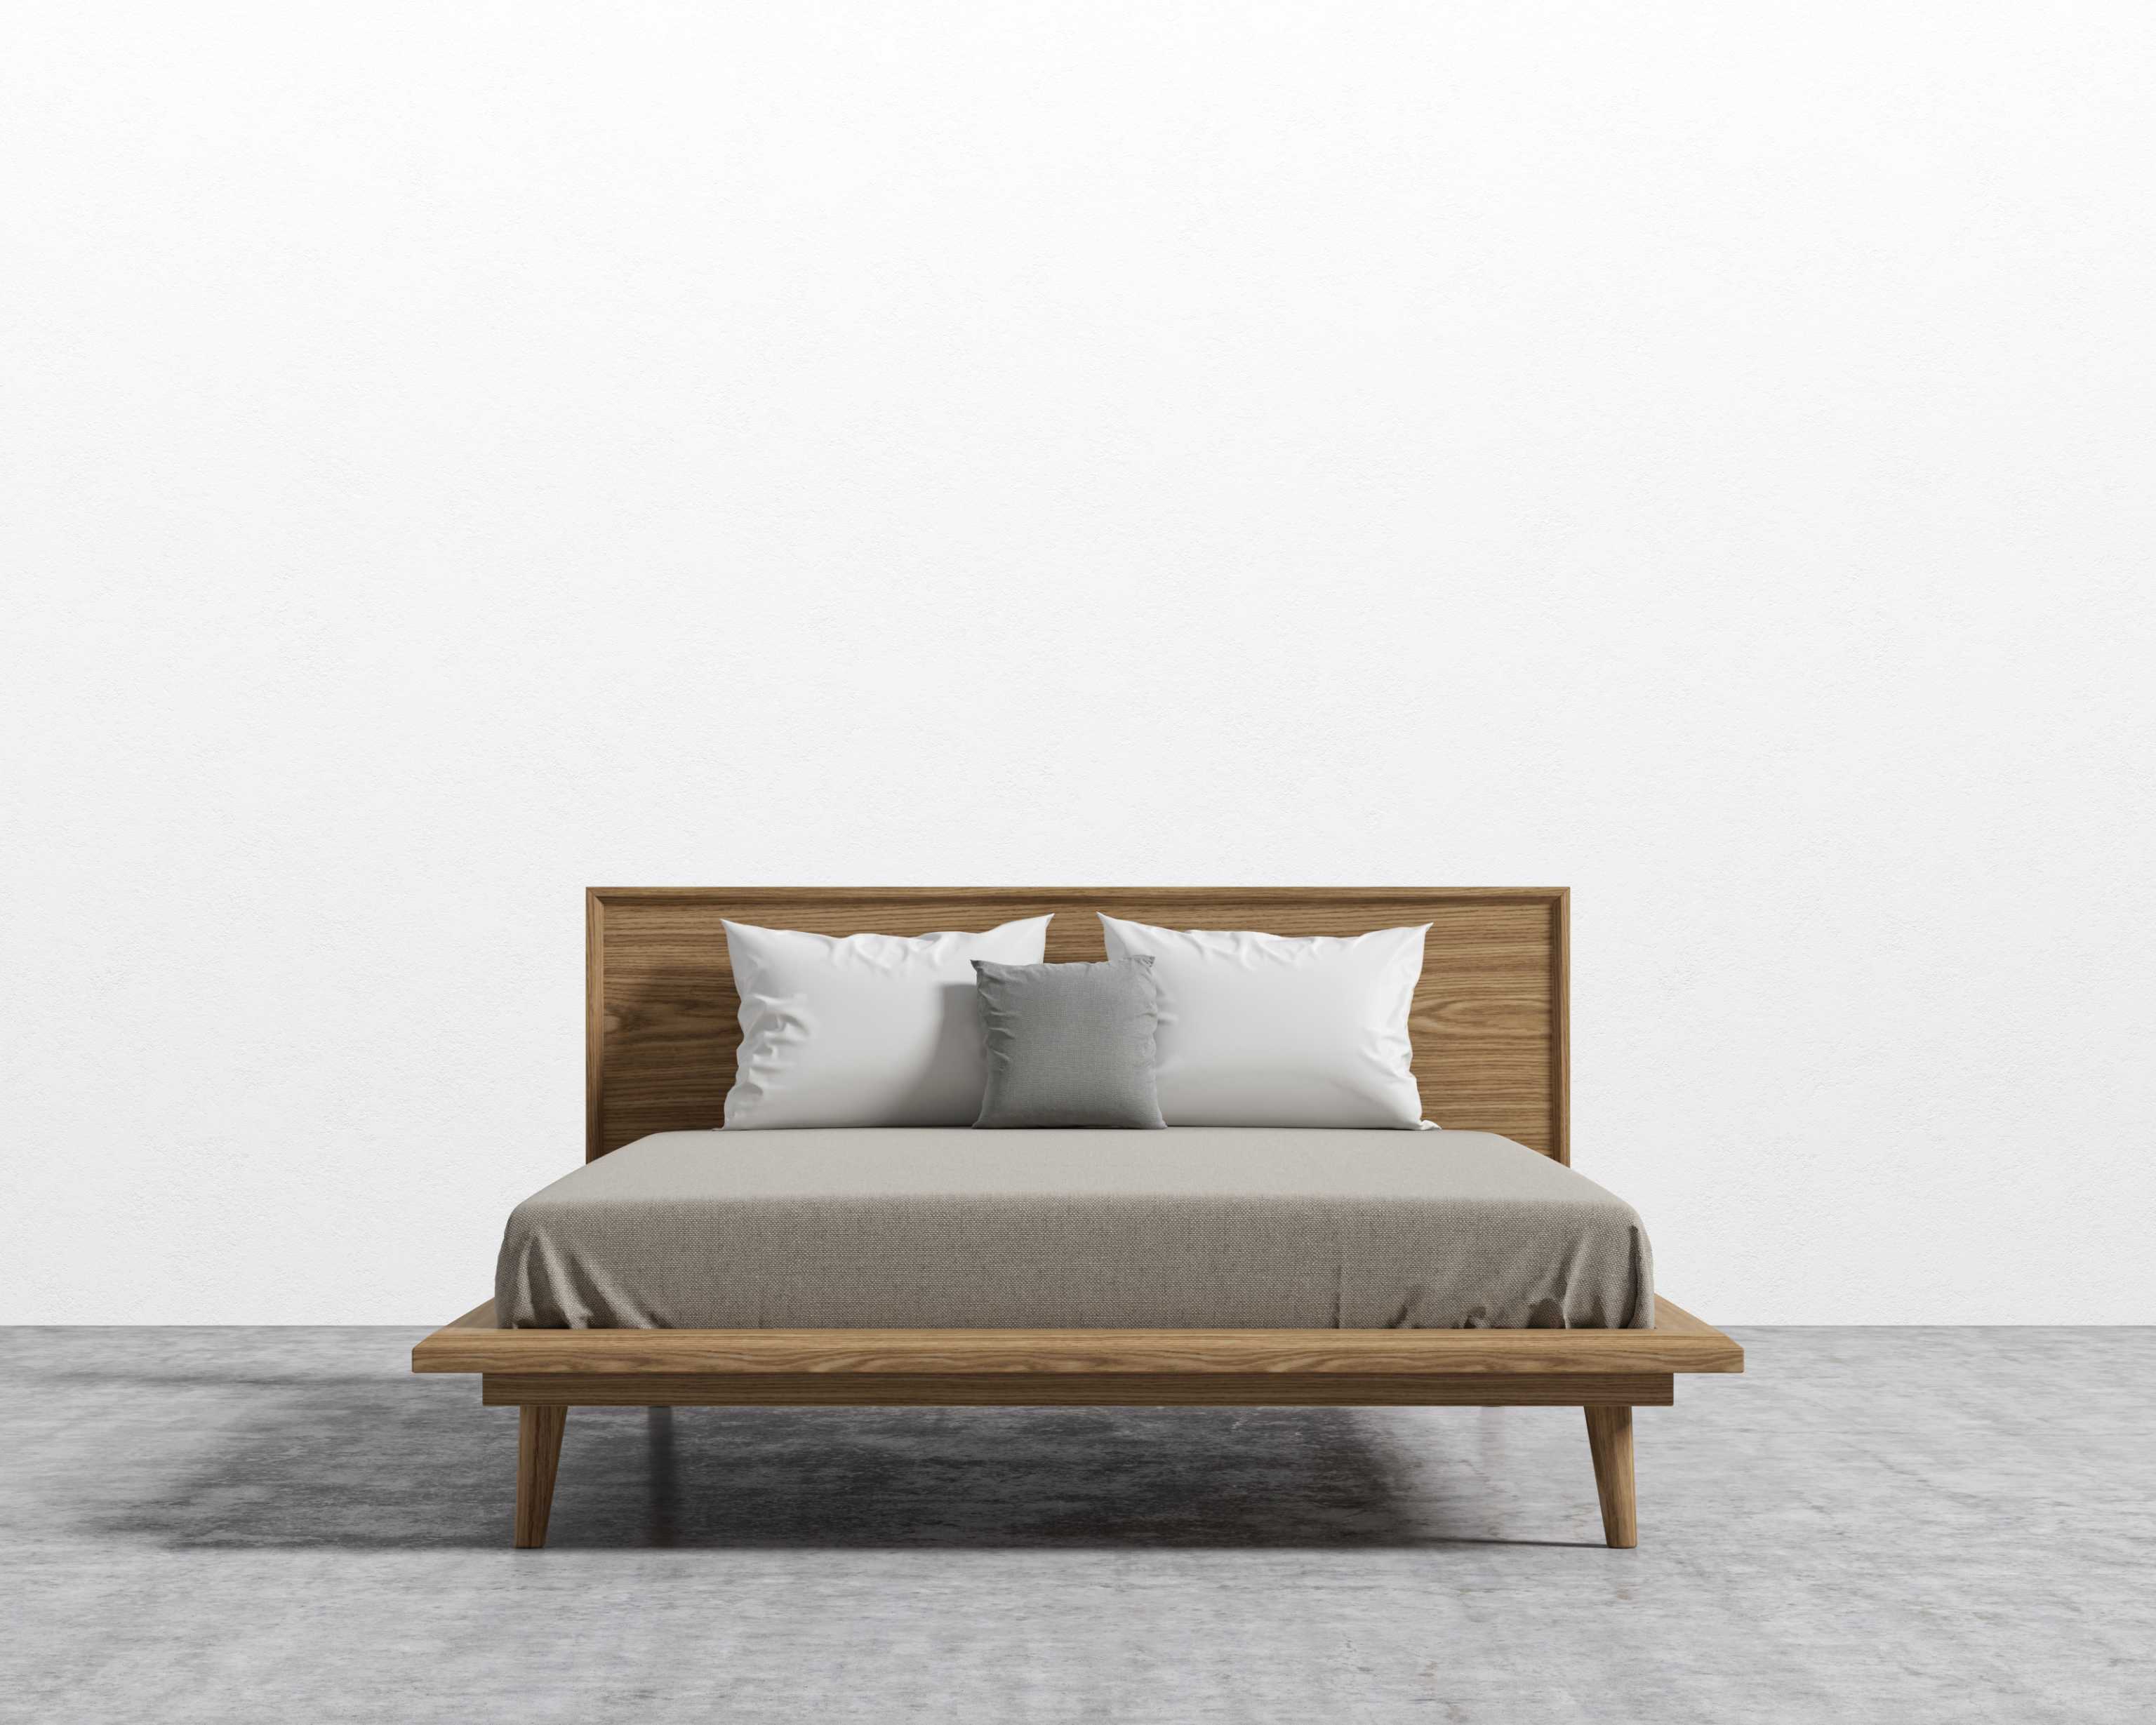 Shop Asher Bed from Rove Concepts on Openhaus